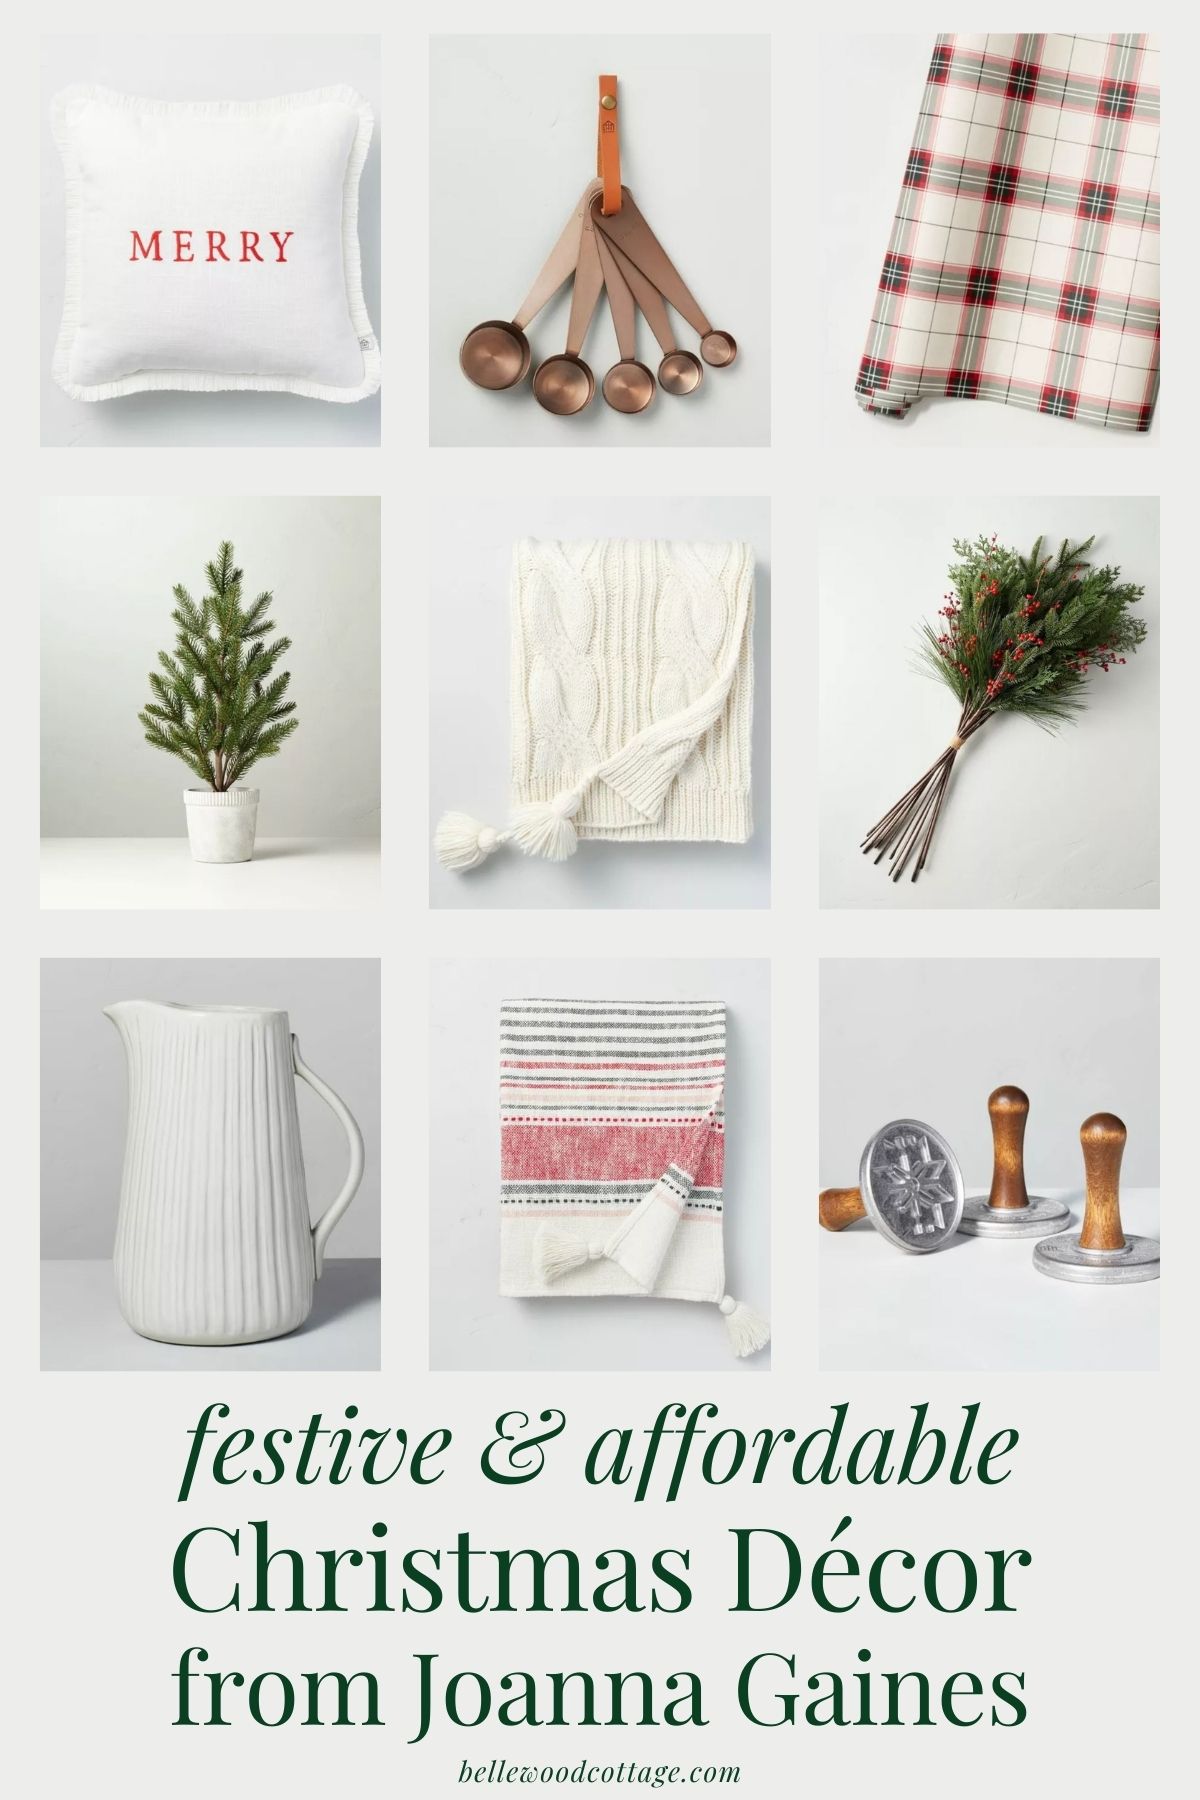 Various Christmas home décor images with the words, "Festive and Affordable Christmas Décor from Joanna Gaines".